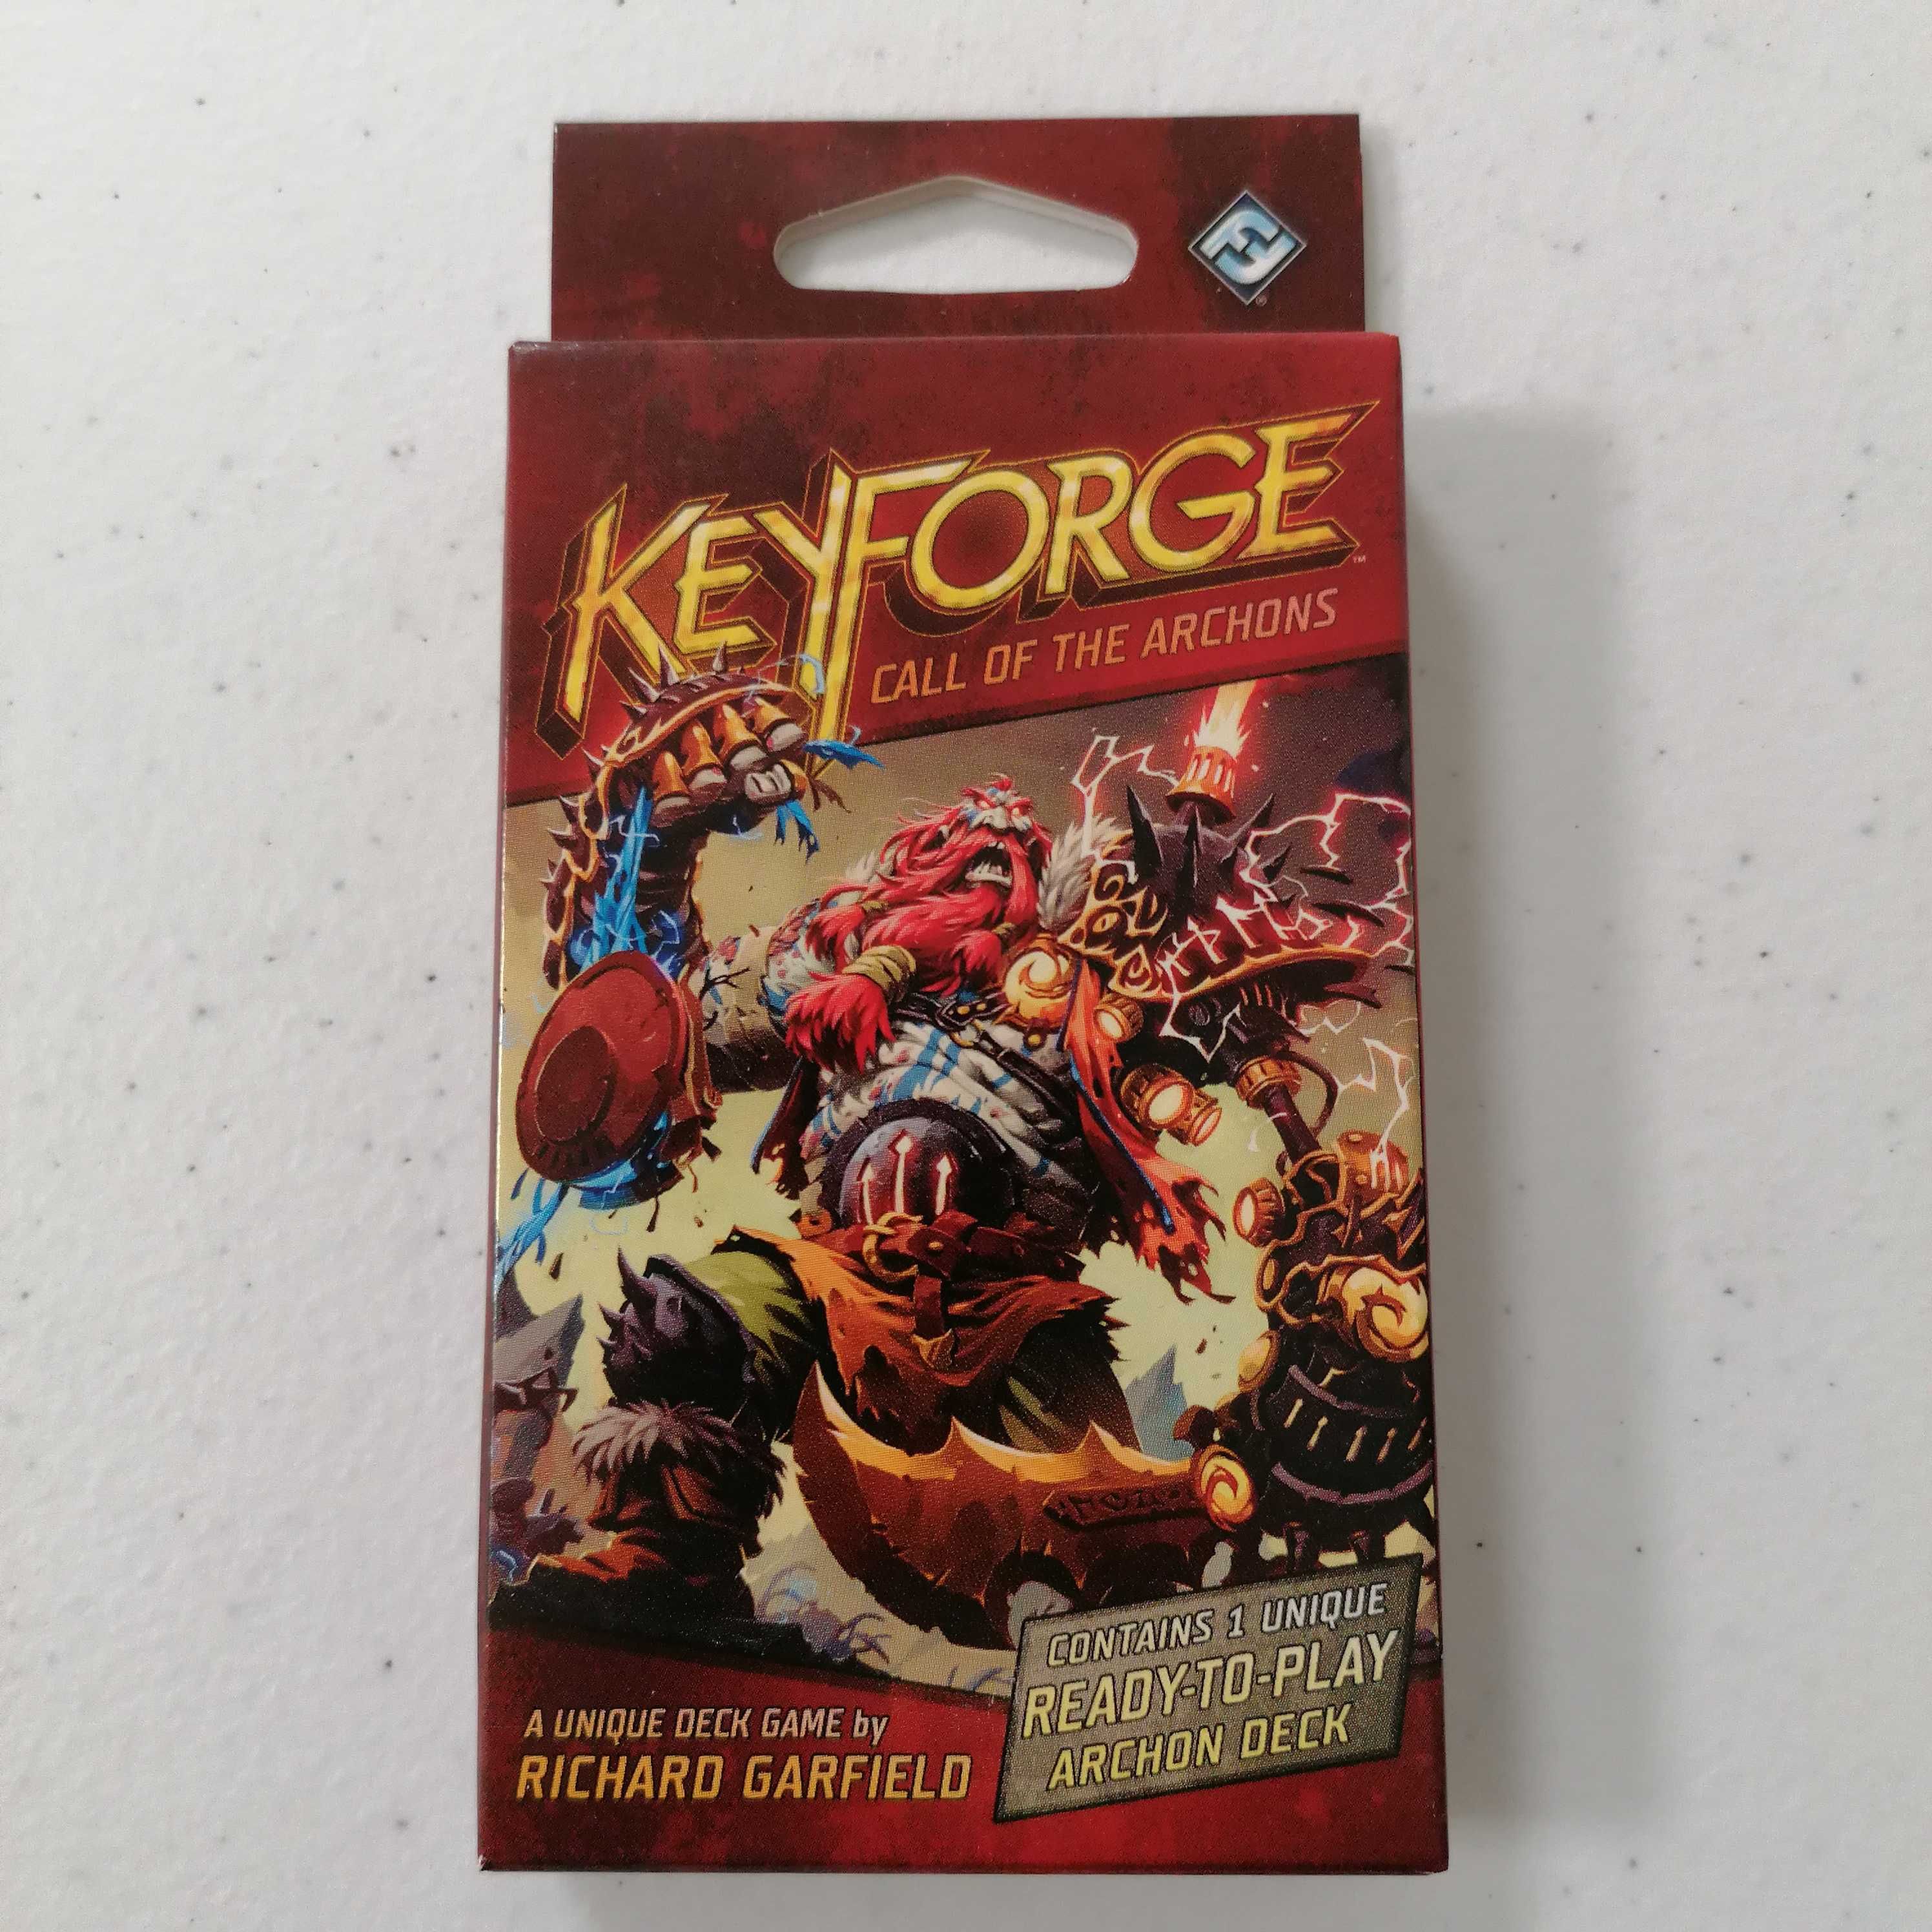 KeyForge Call of the Archons – Archon Deck